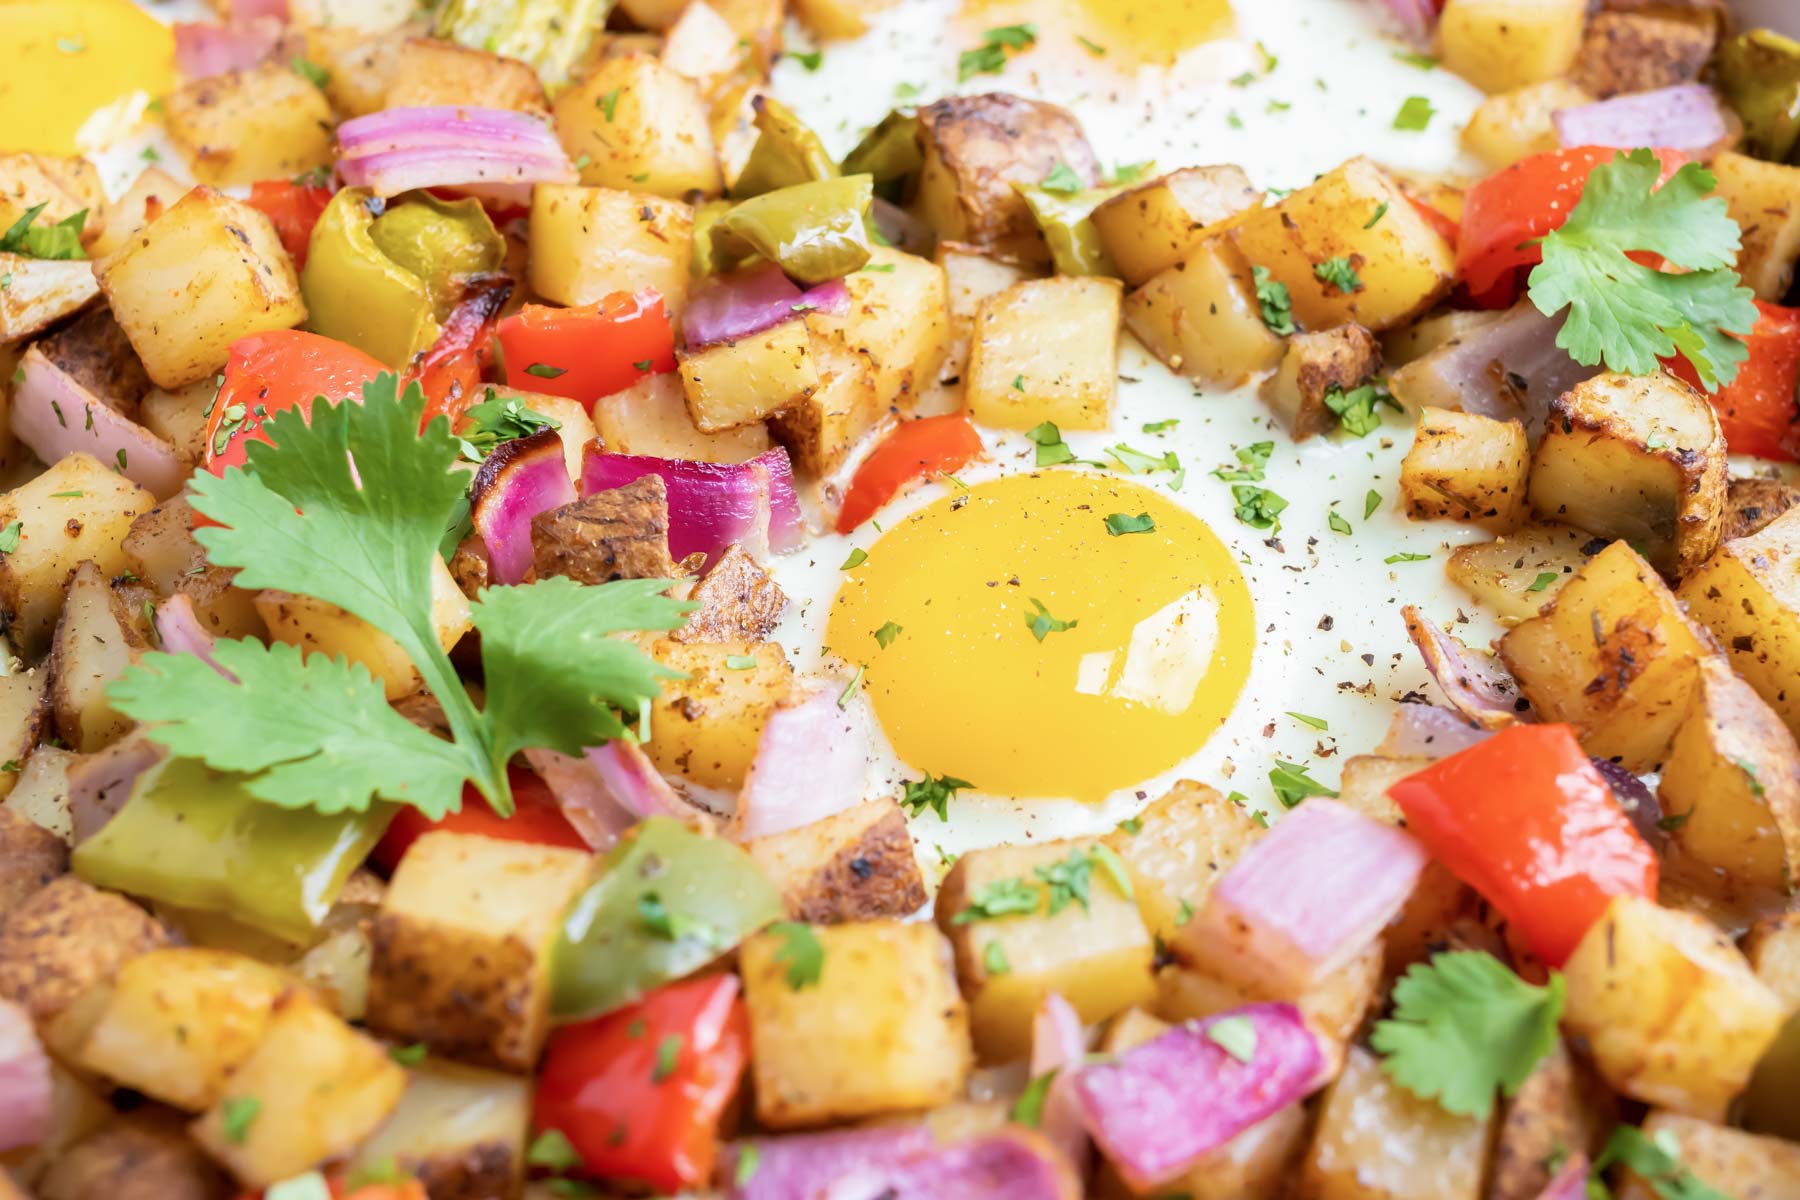 An over-easy egg in the middle of a pan full of roasted breakfast potatoes, bell peppers, and onions.